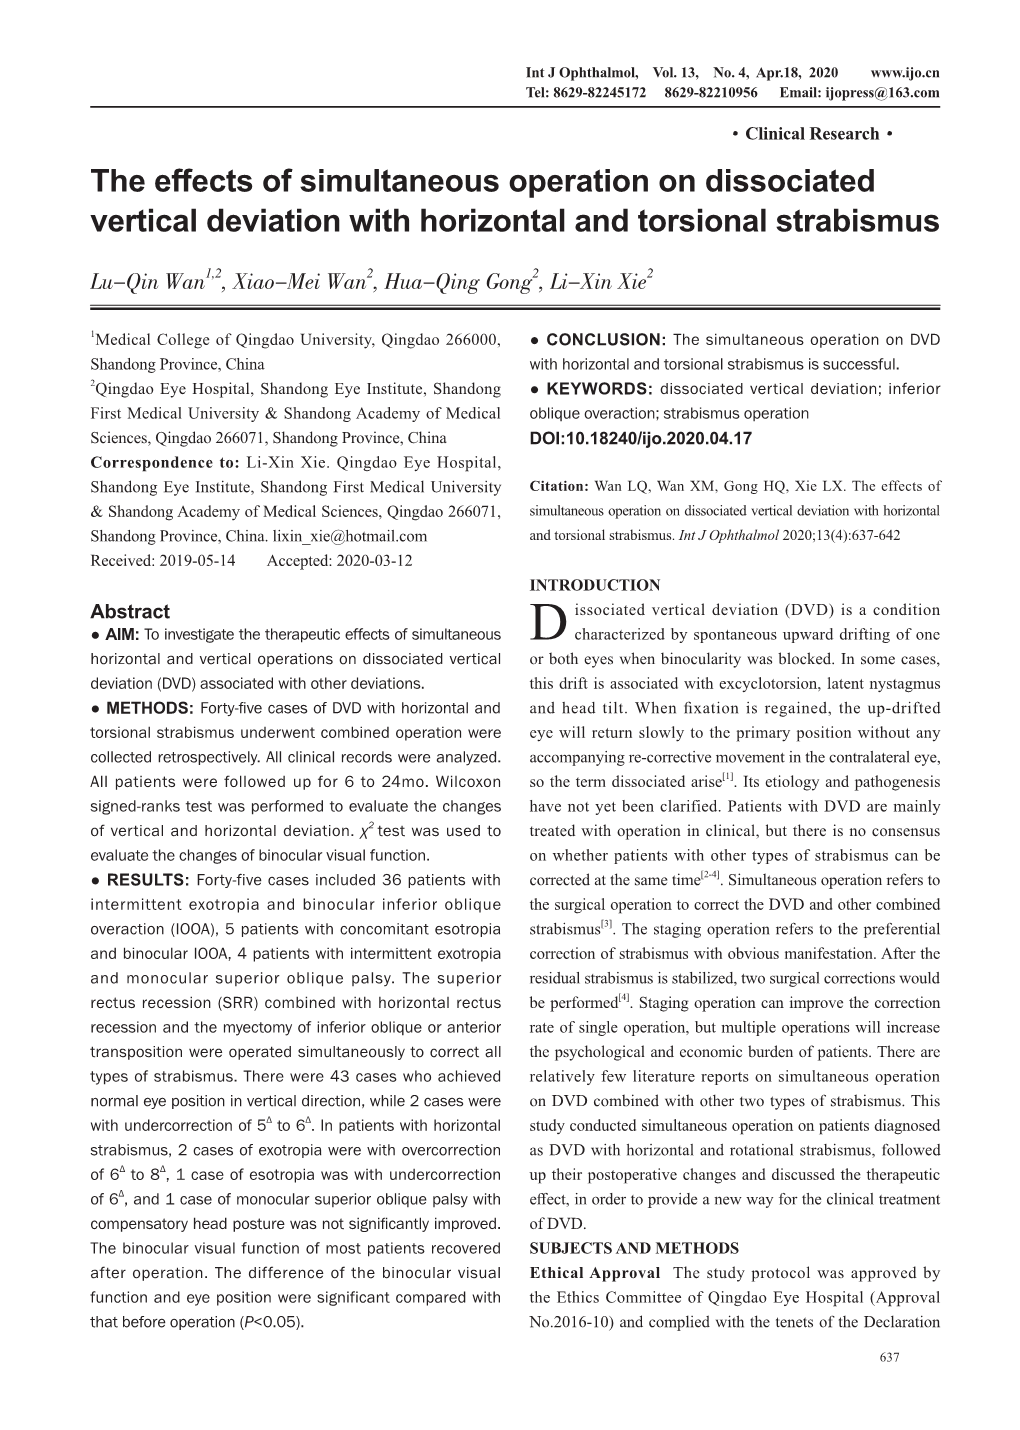 The Effects of Simultaneous Operation on Dissociated Vertical Deviation with Horizontal and Torsional Strabismus